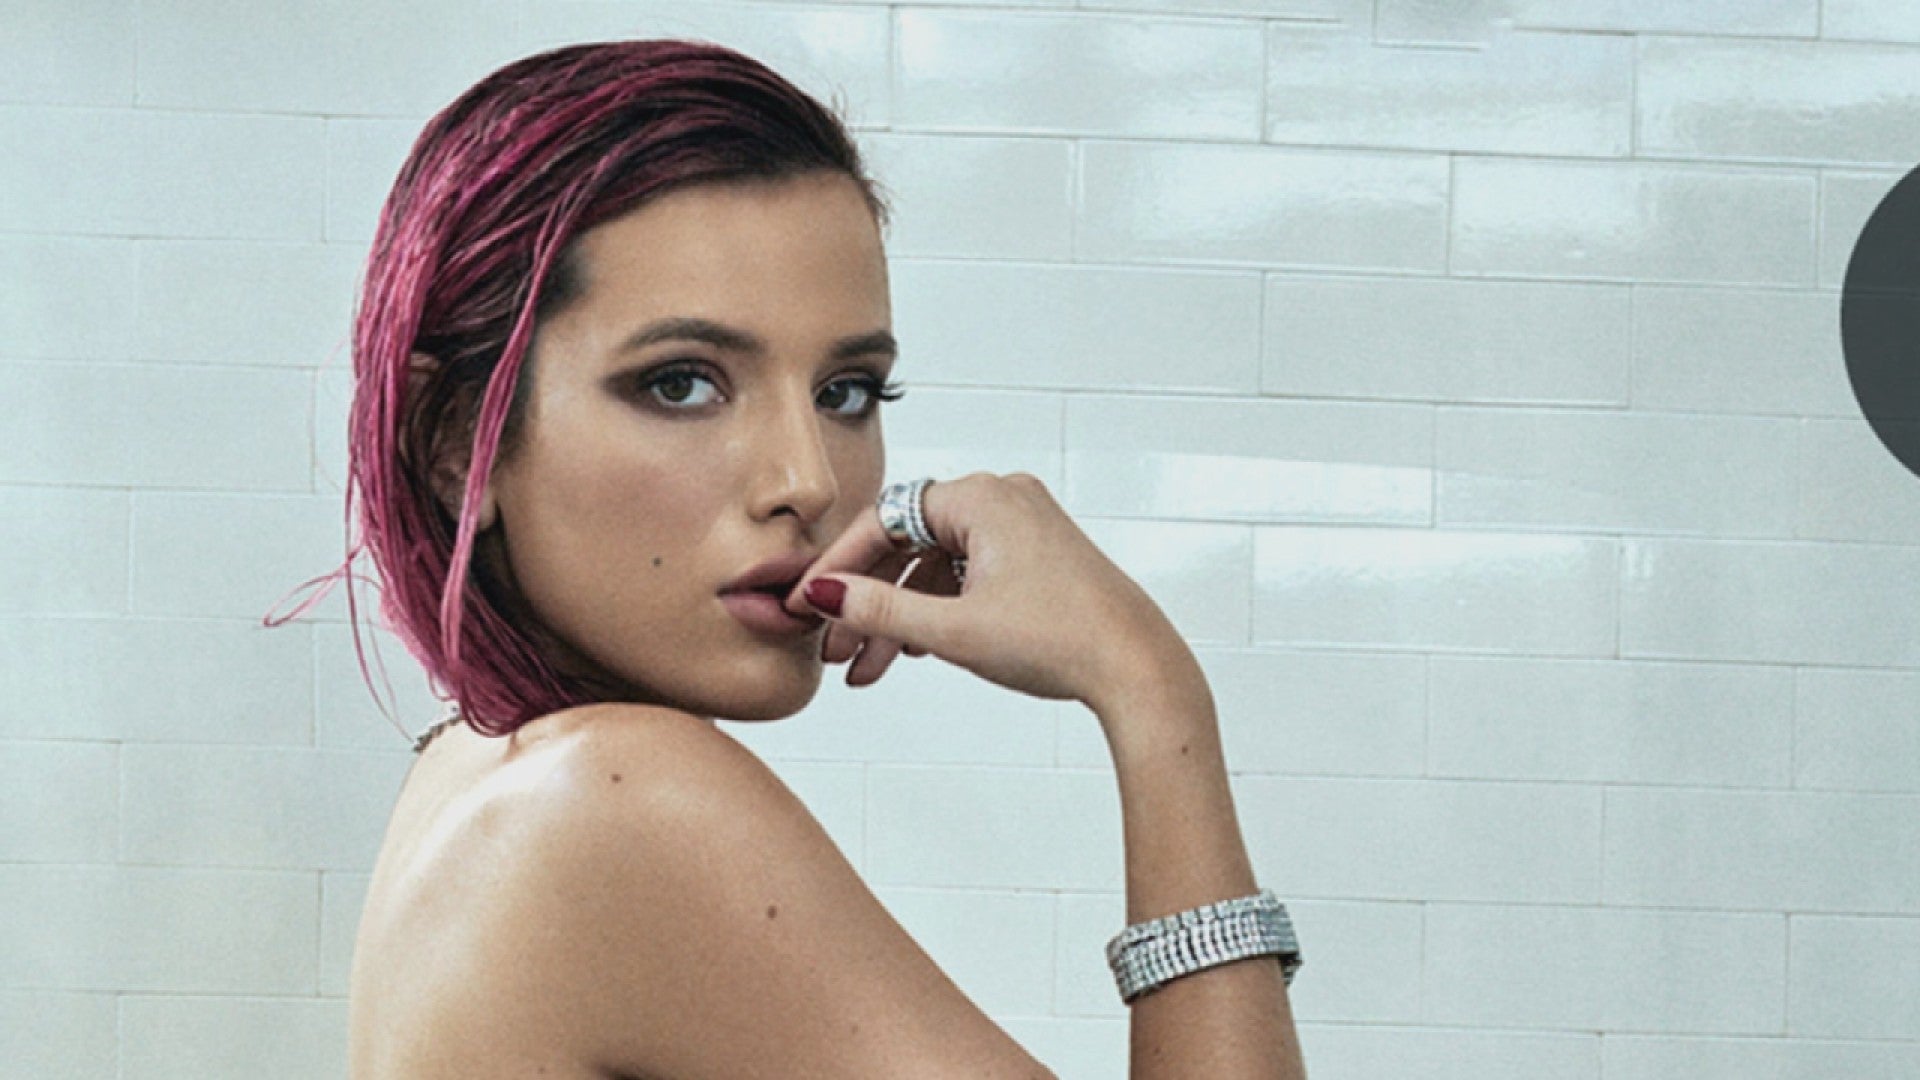 Bella Thorne Hd Porn - Bella Thorne Goes Nude for Latest Photo Shoot -- See the Sexy Shots!